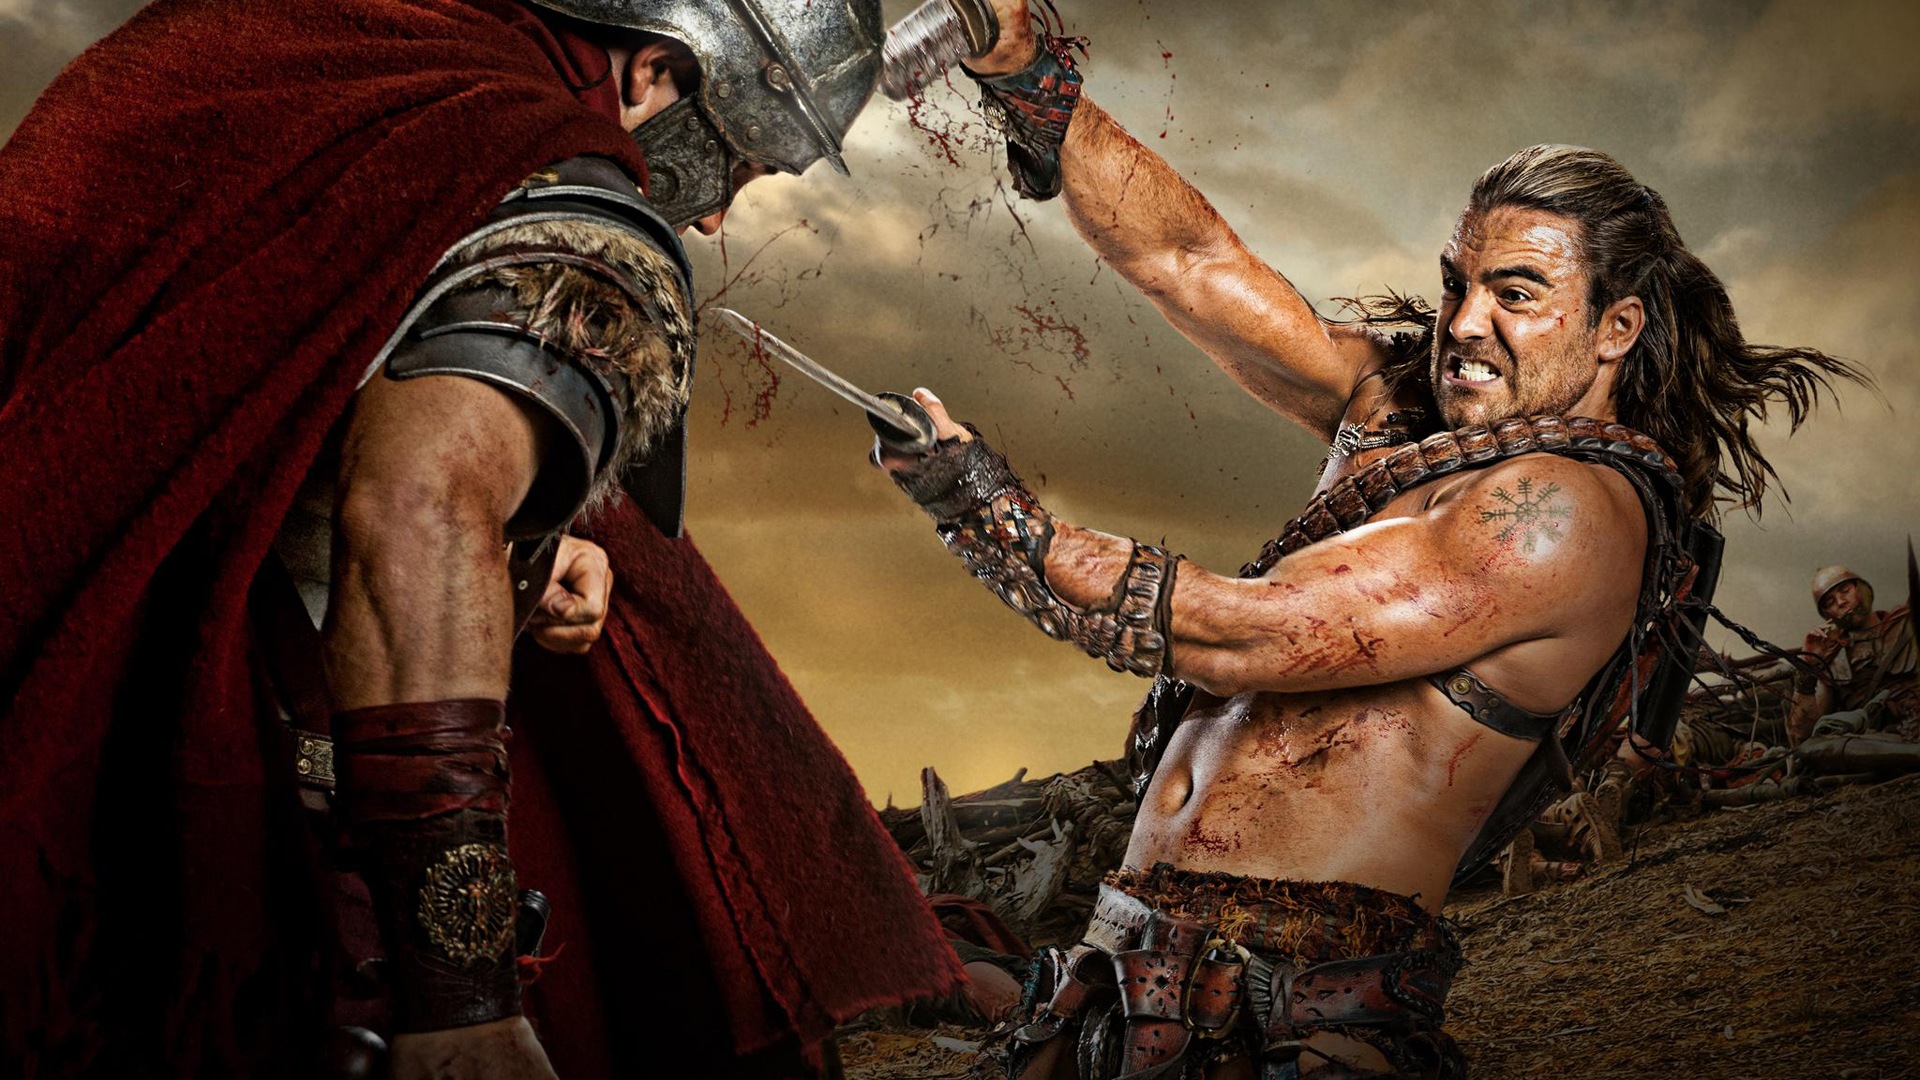 Spartacus: War of the Damned HD Wallpaper #5 - 1920x1080